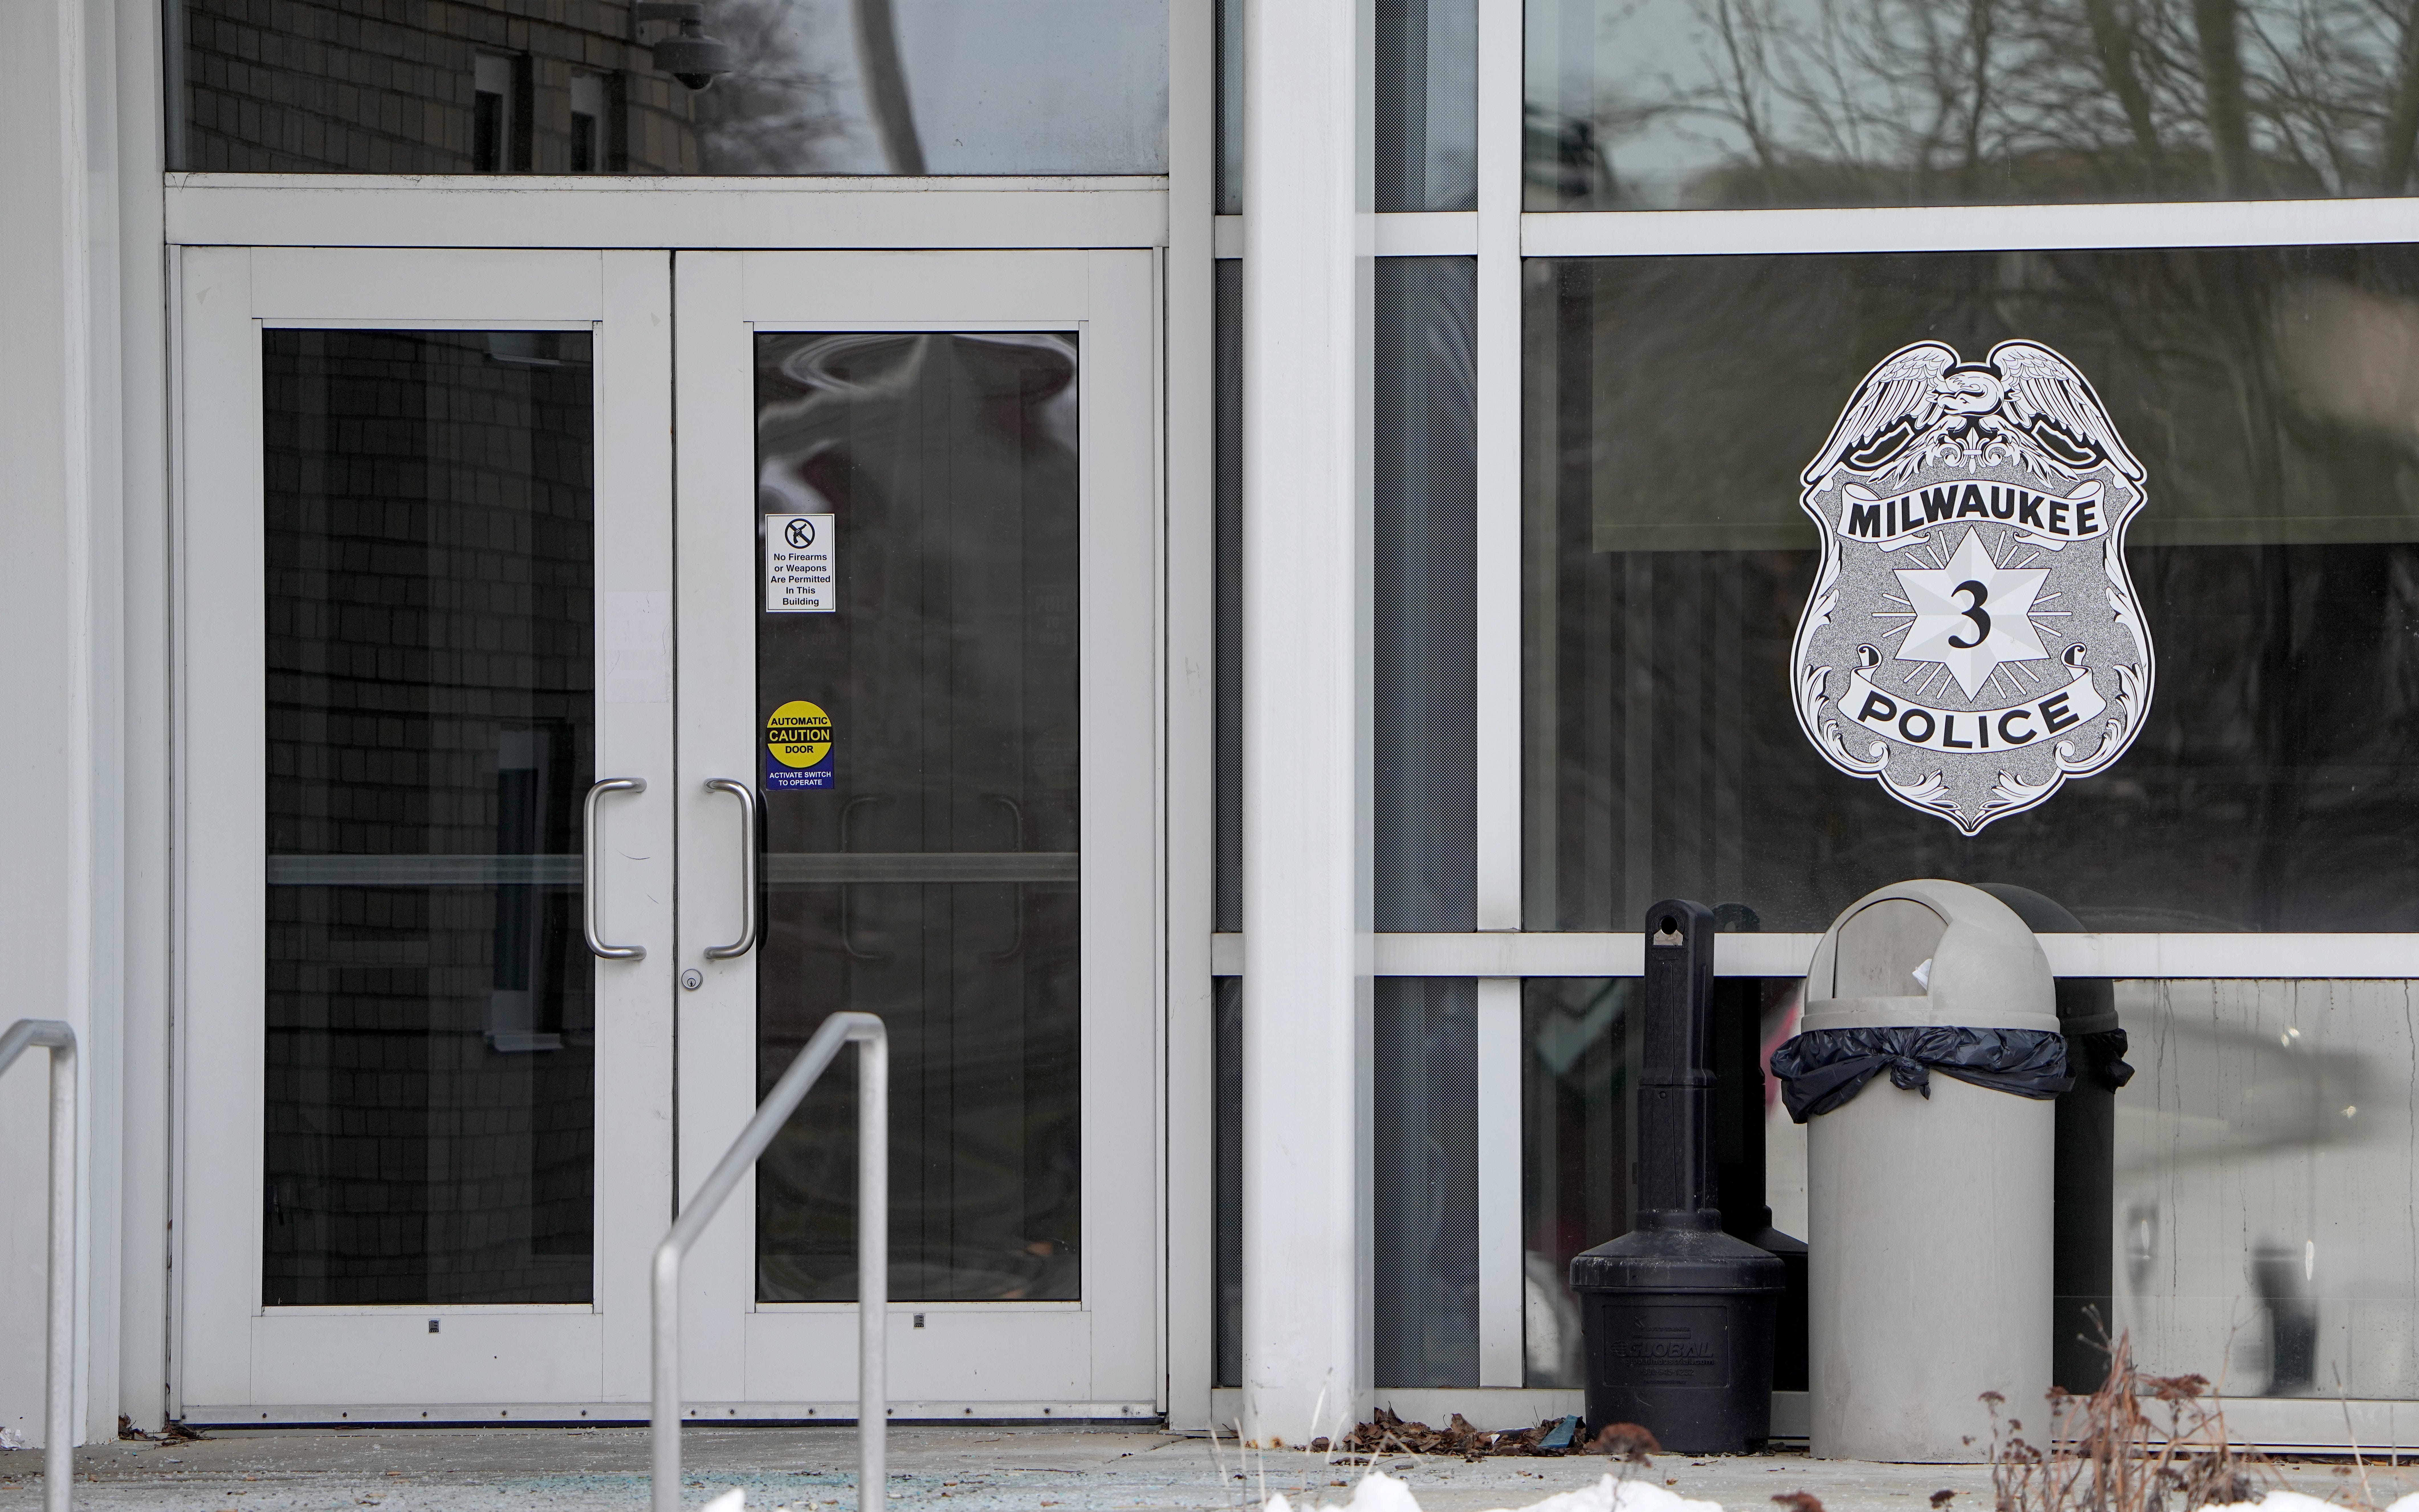 An entrance to the Milwaukee Police District 3 building is shown in Milwaukee, Wis. Bobbie Lou Schoeffling, 31, was found shot to death inside her home two weeks after telling a Milwaukee police officer on July 15 that her ex-boyfriend beat her in a car in front of her children about 30 minutes earlier.